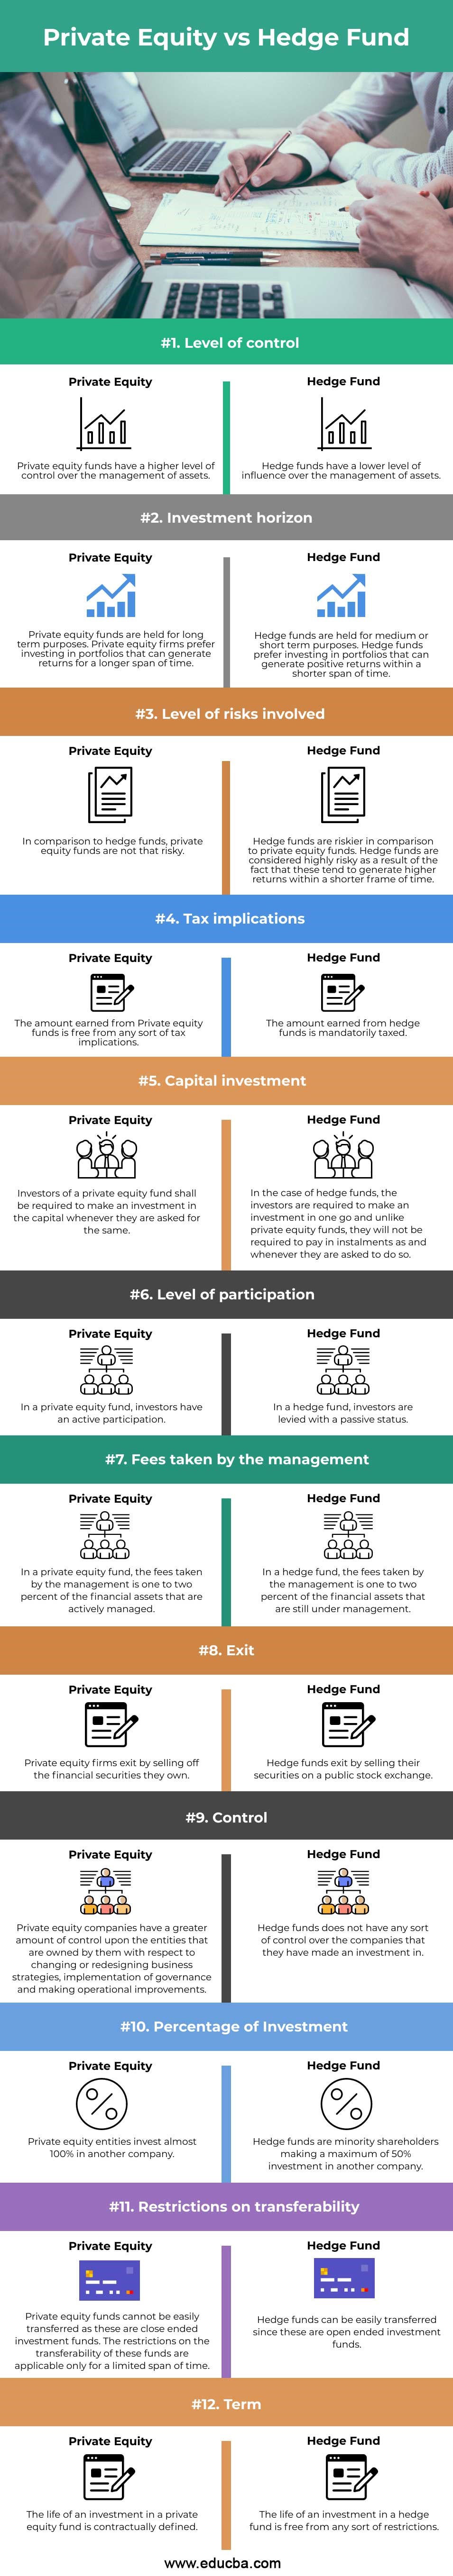 Private-Equity-vs-Hedge-Fund-info